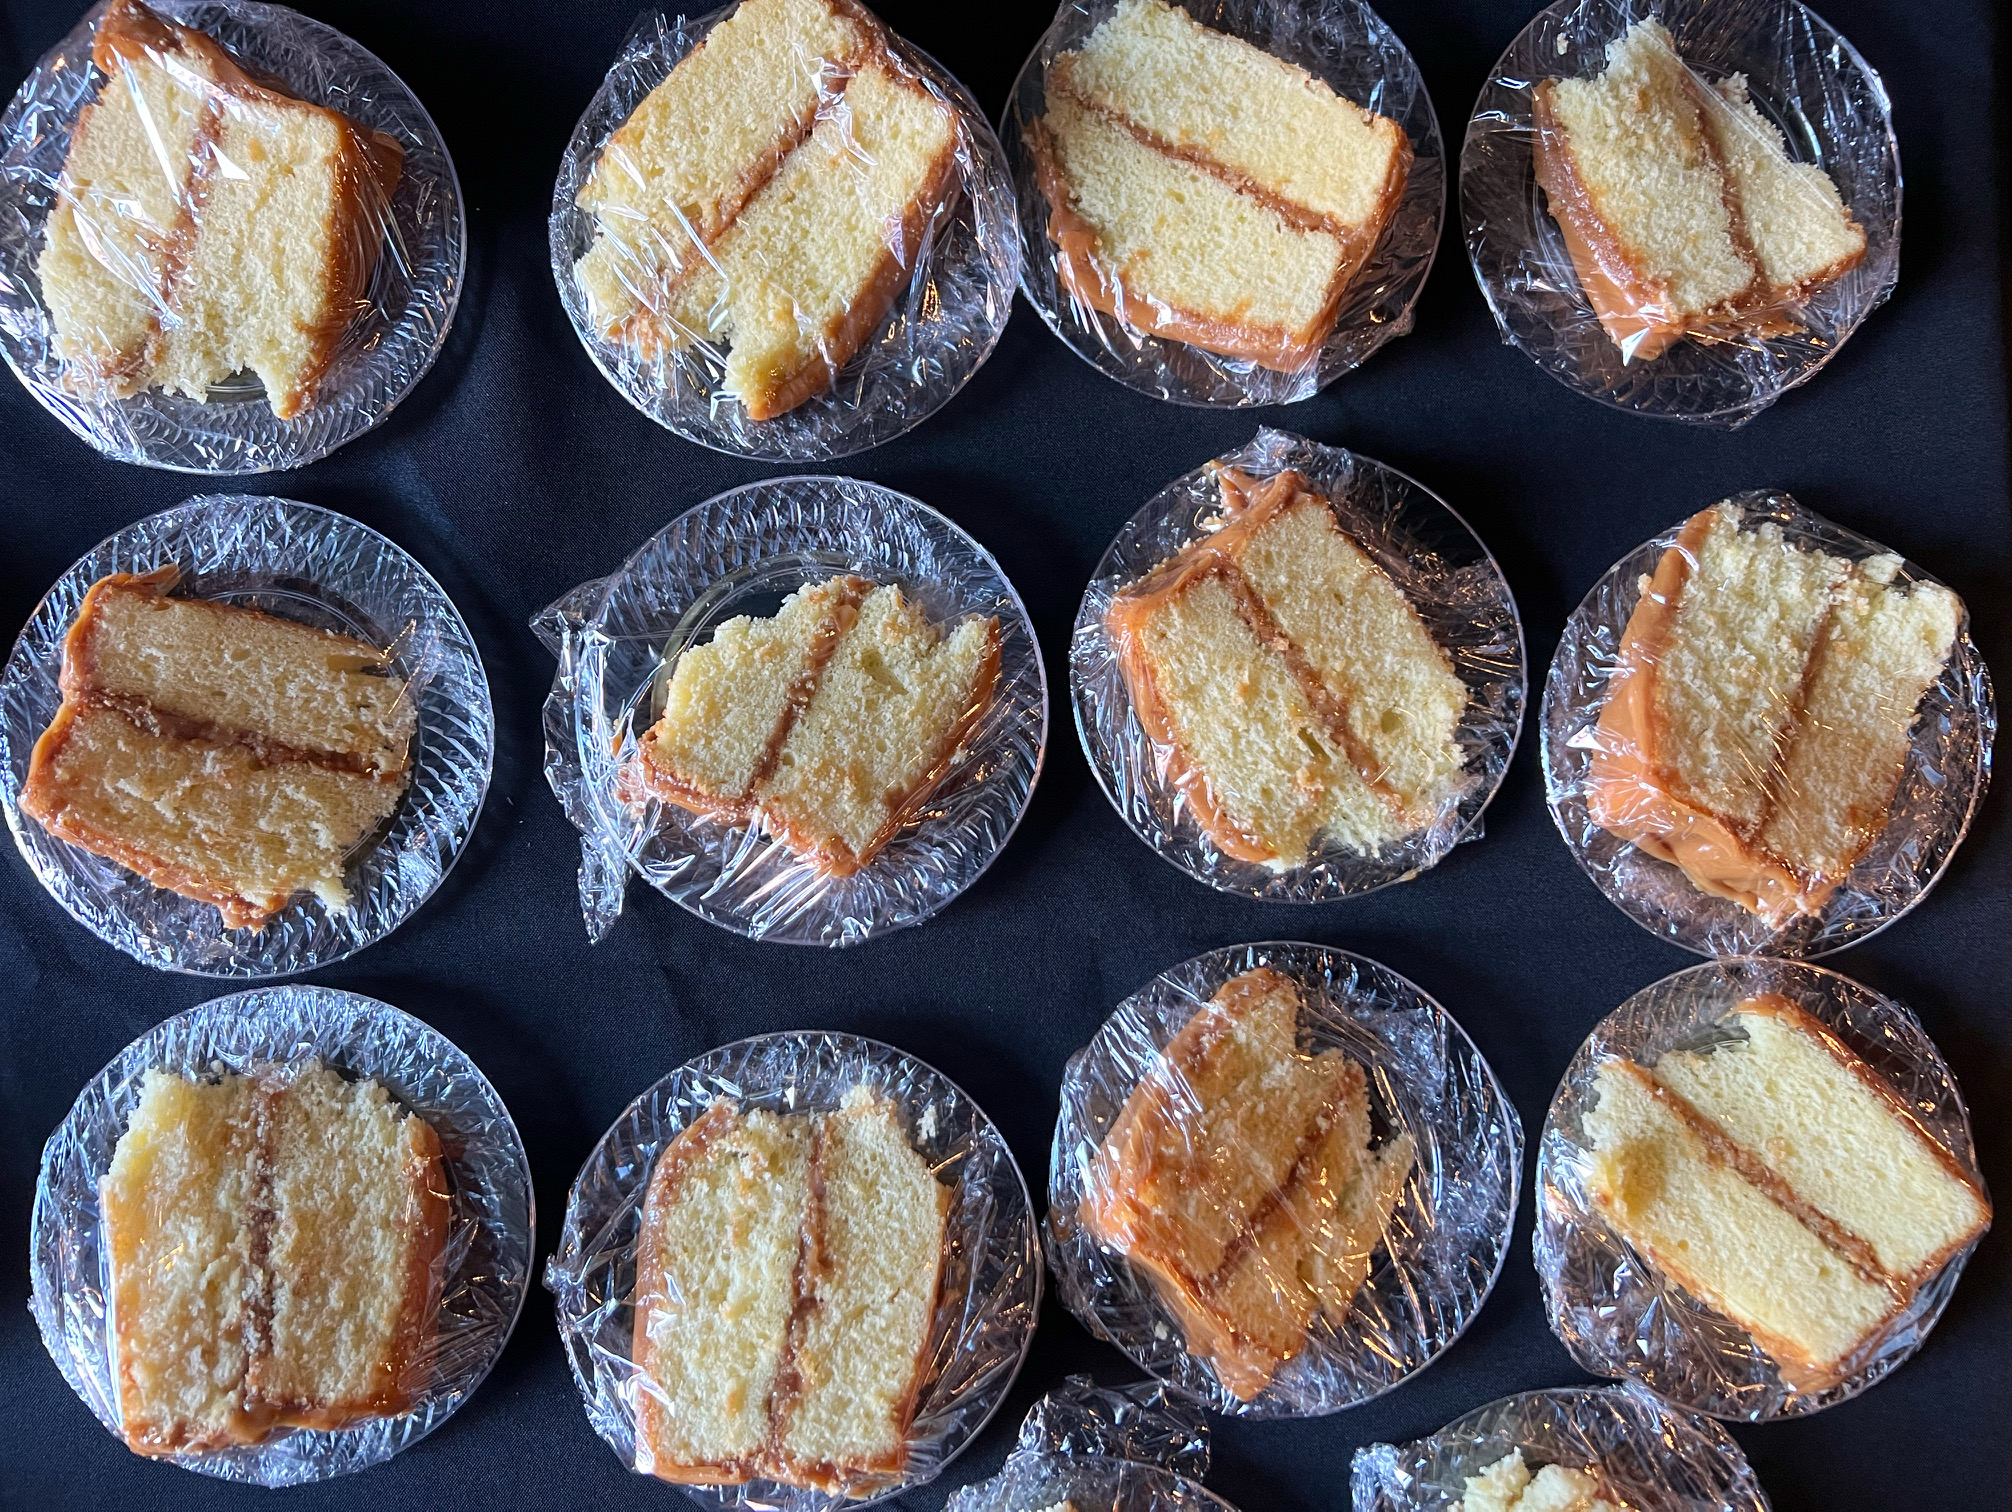 On a black table, there are lots of slices of vanilla cake with dark caramel frosting. All plates are clear plastic and there is plastic wrap around the slices. Photo by Alyssa Buckley.